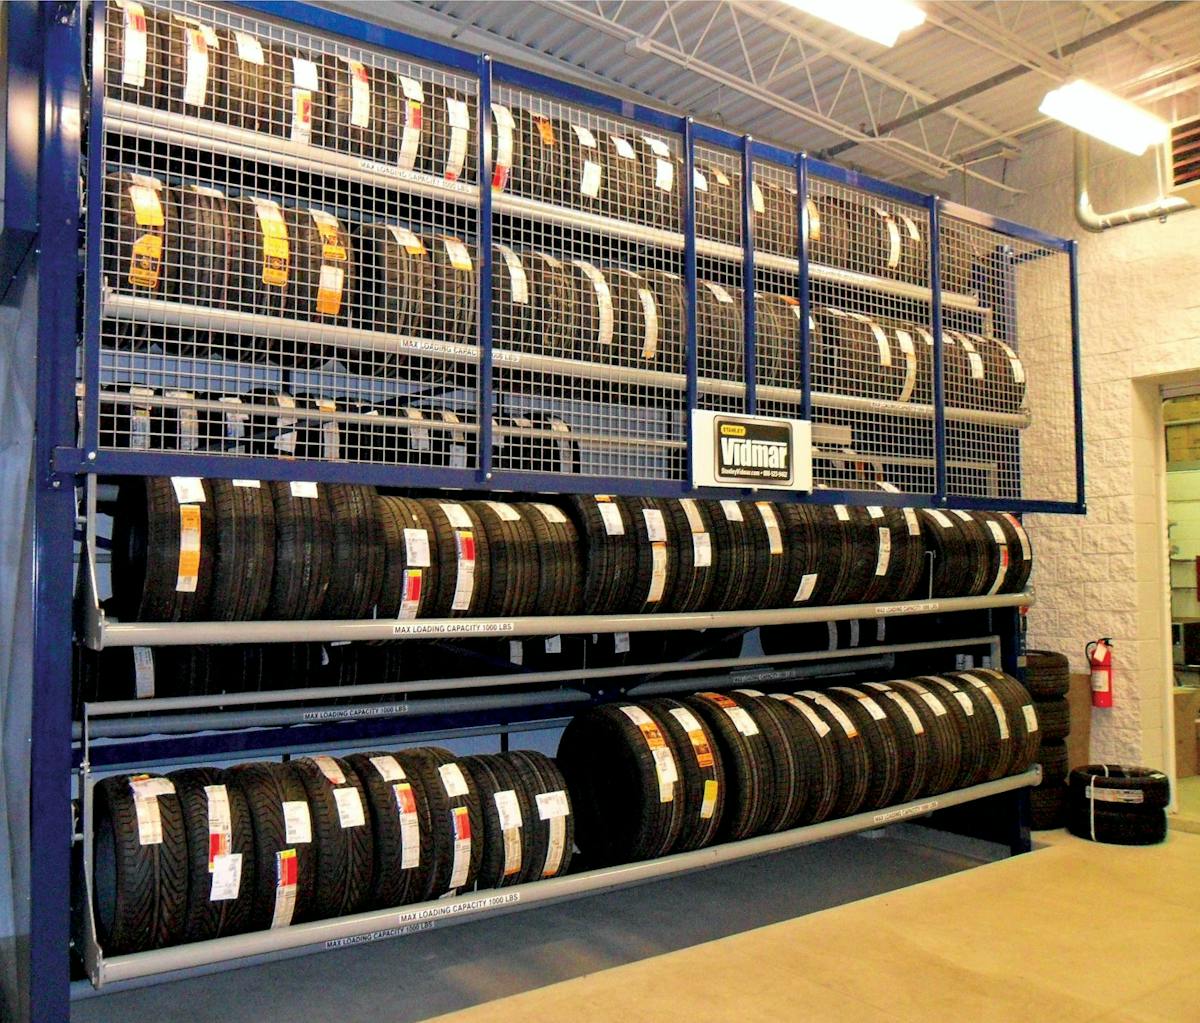 tire-carousel-does-heavy-lifting